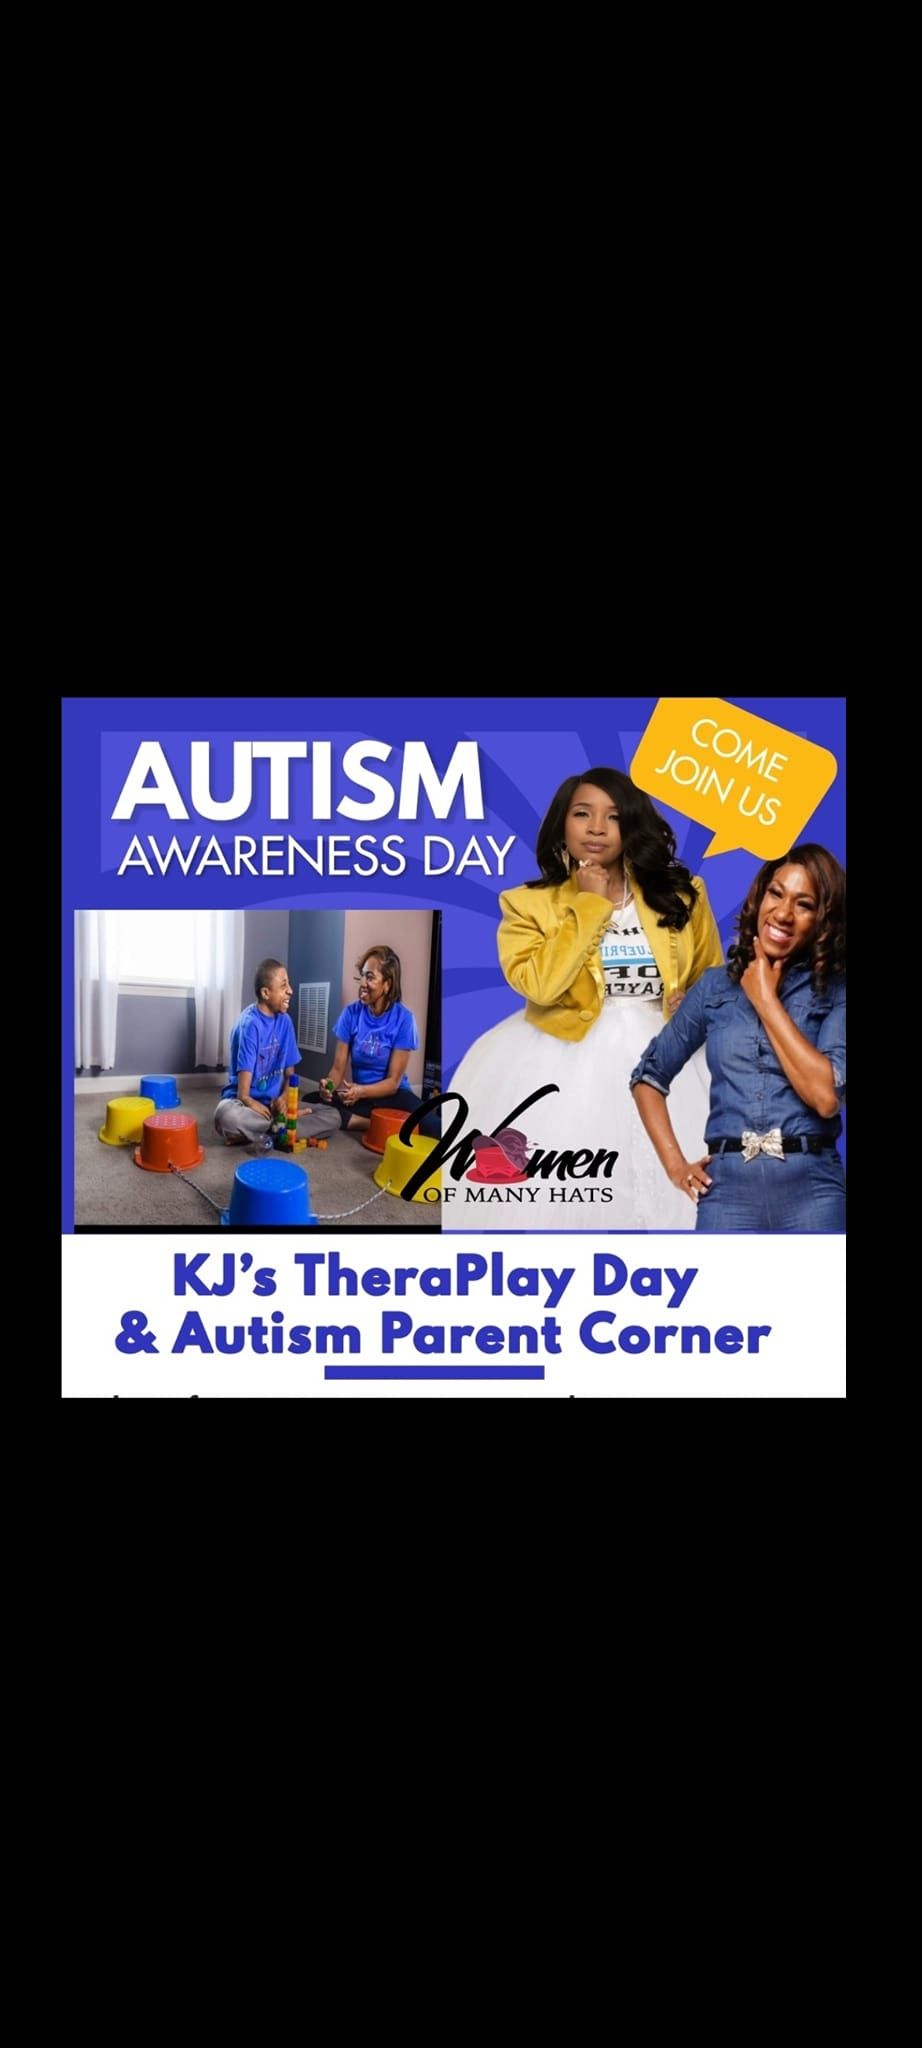 KJ's Theraplay Day and Autism Corner